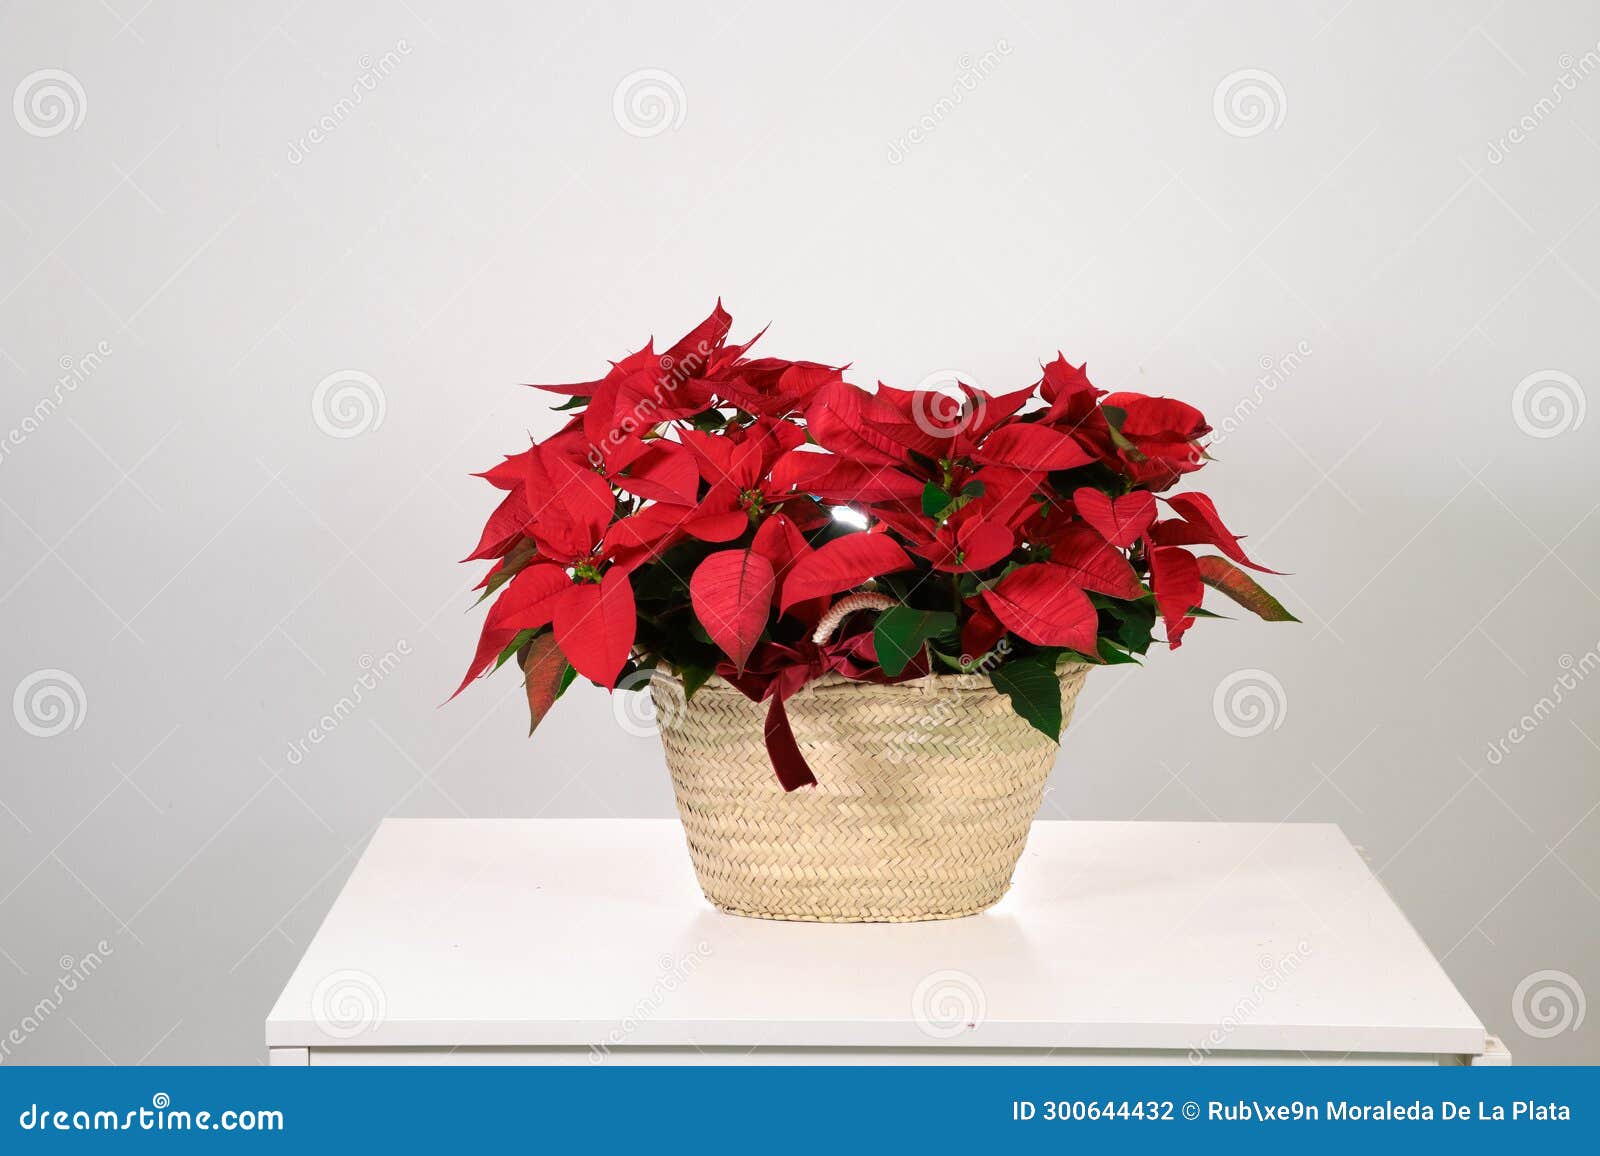 poinsettia in a basket on a white background. christmas decoration.